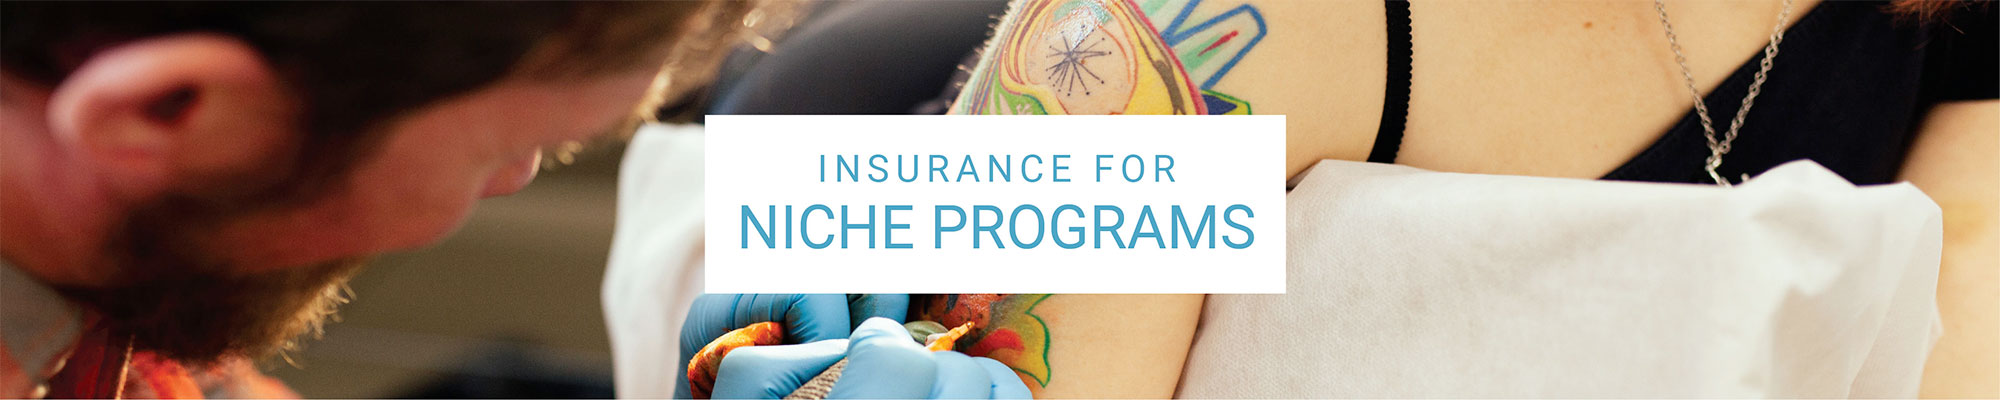 photo of tattoo artist working with text 'Insurance for Niche Programs'